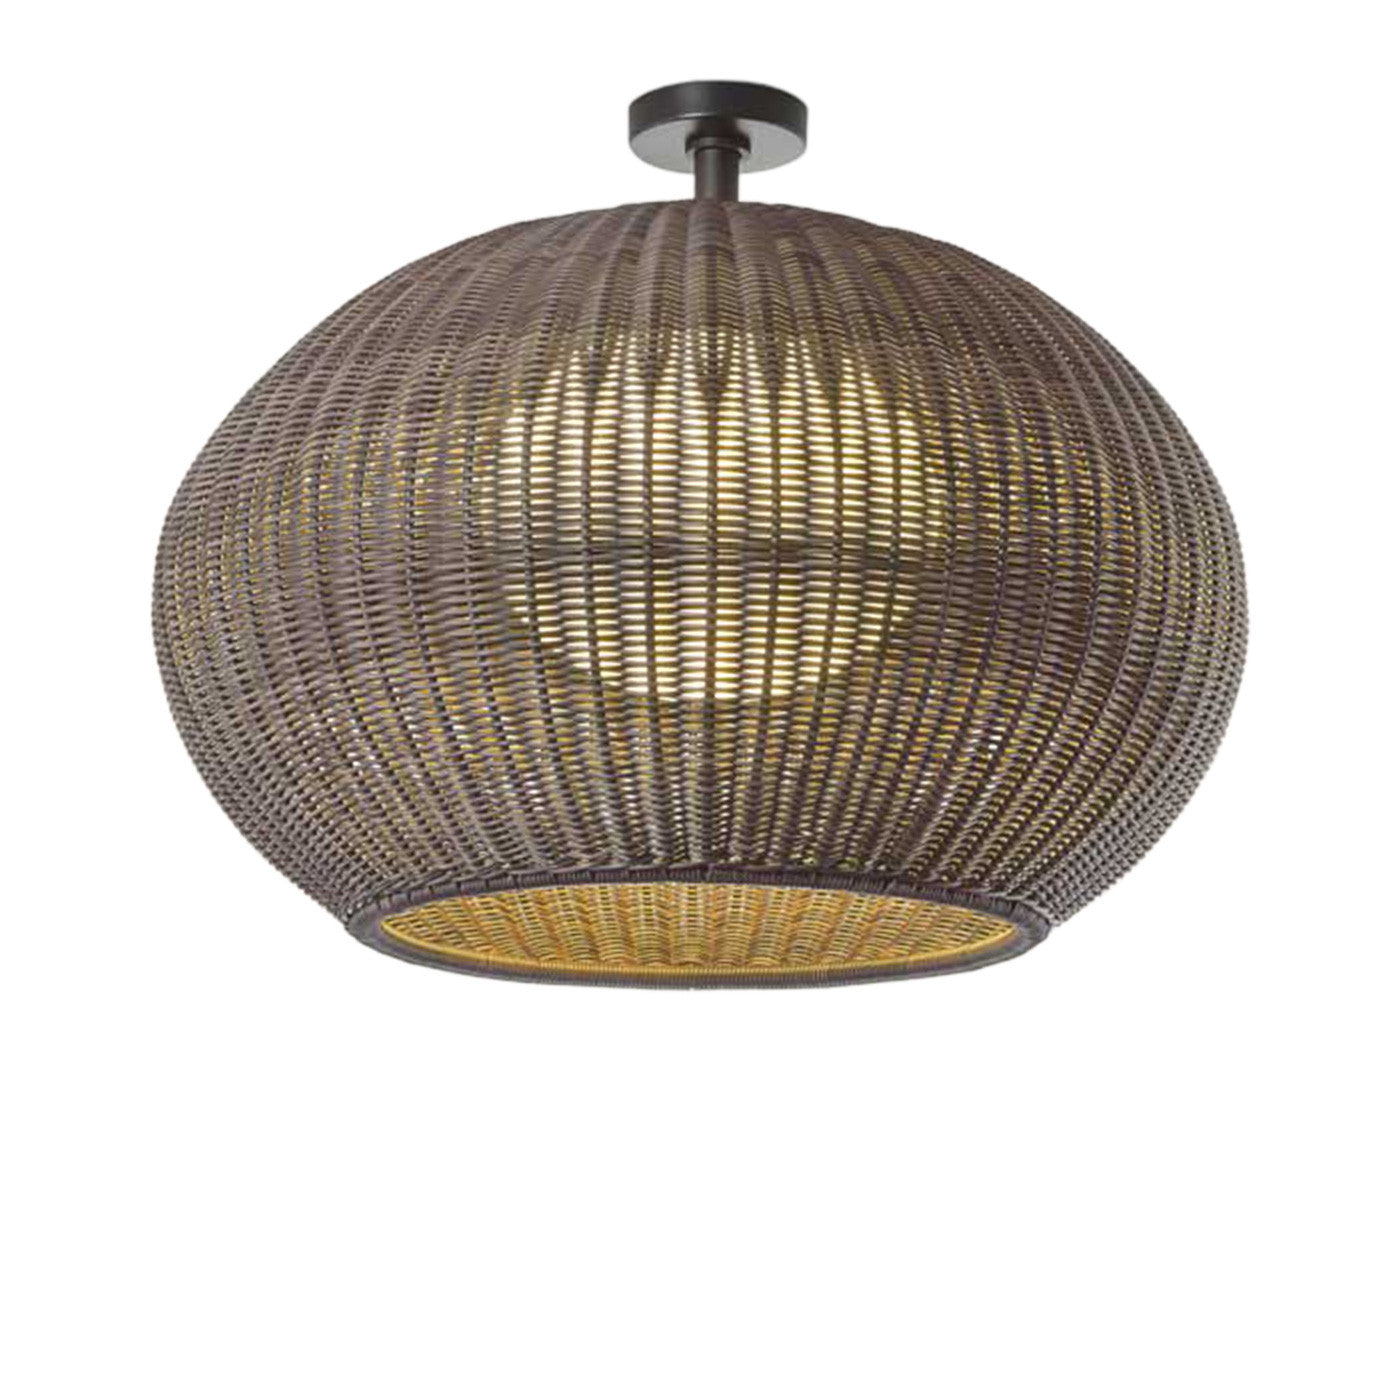 brown rattan outdoor ceiling light ,cane outdoor ceiling lamp 